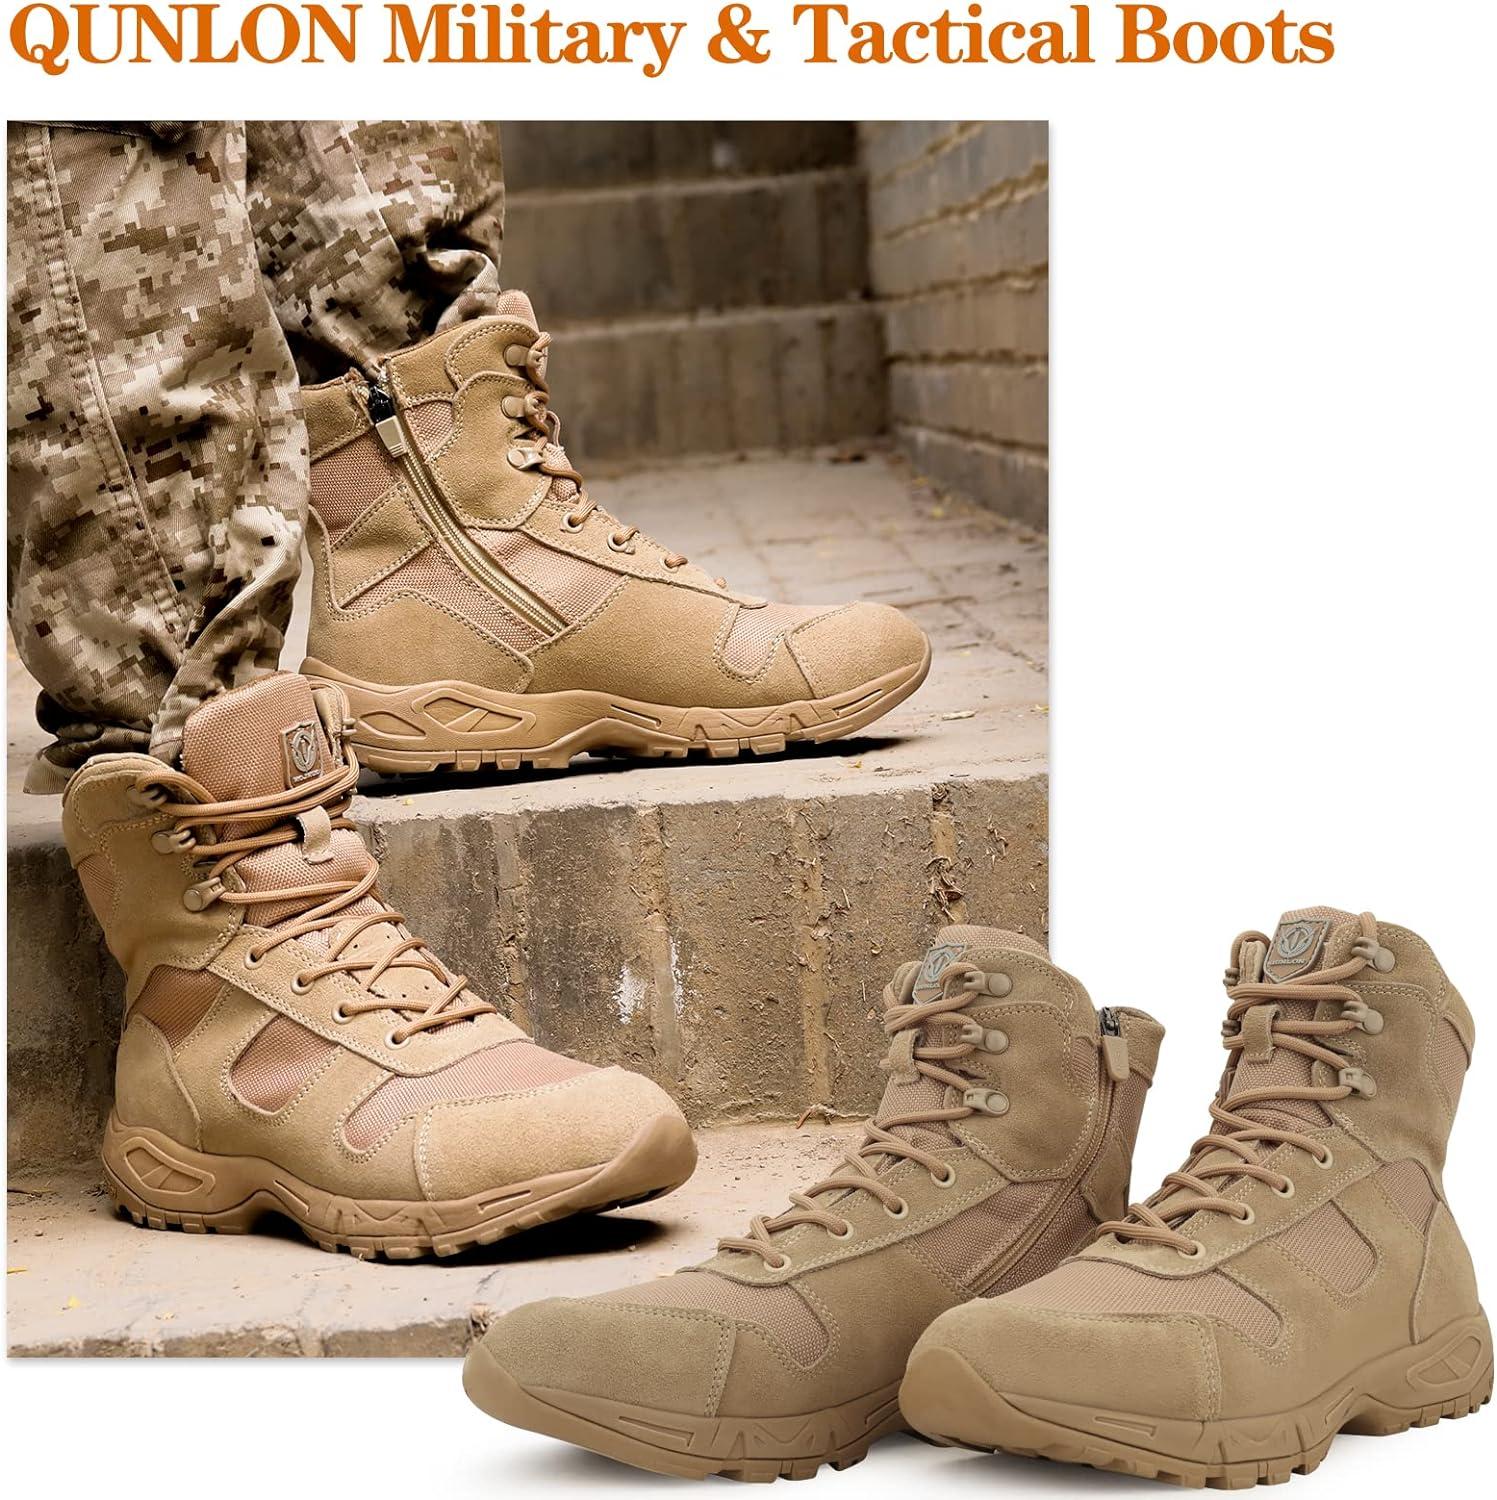 QUNLON Lightweight Tactical Boots for Men 8 Inches Military Boots